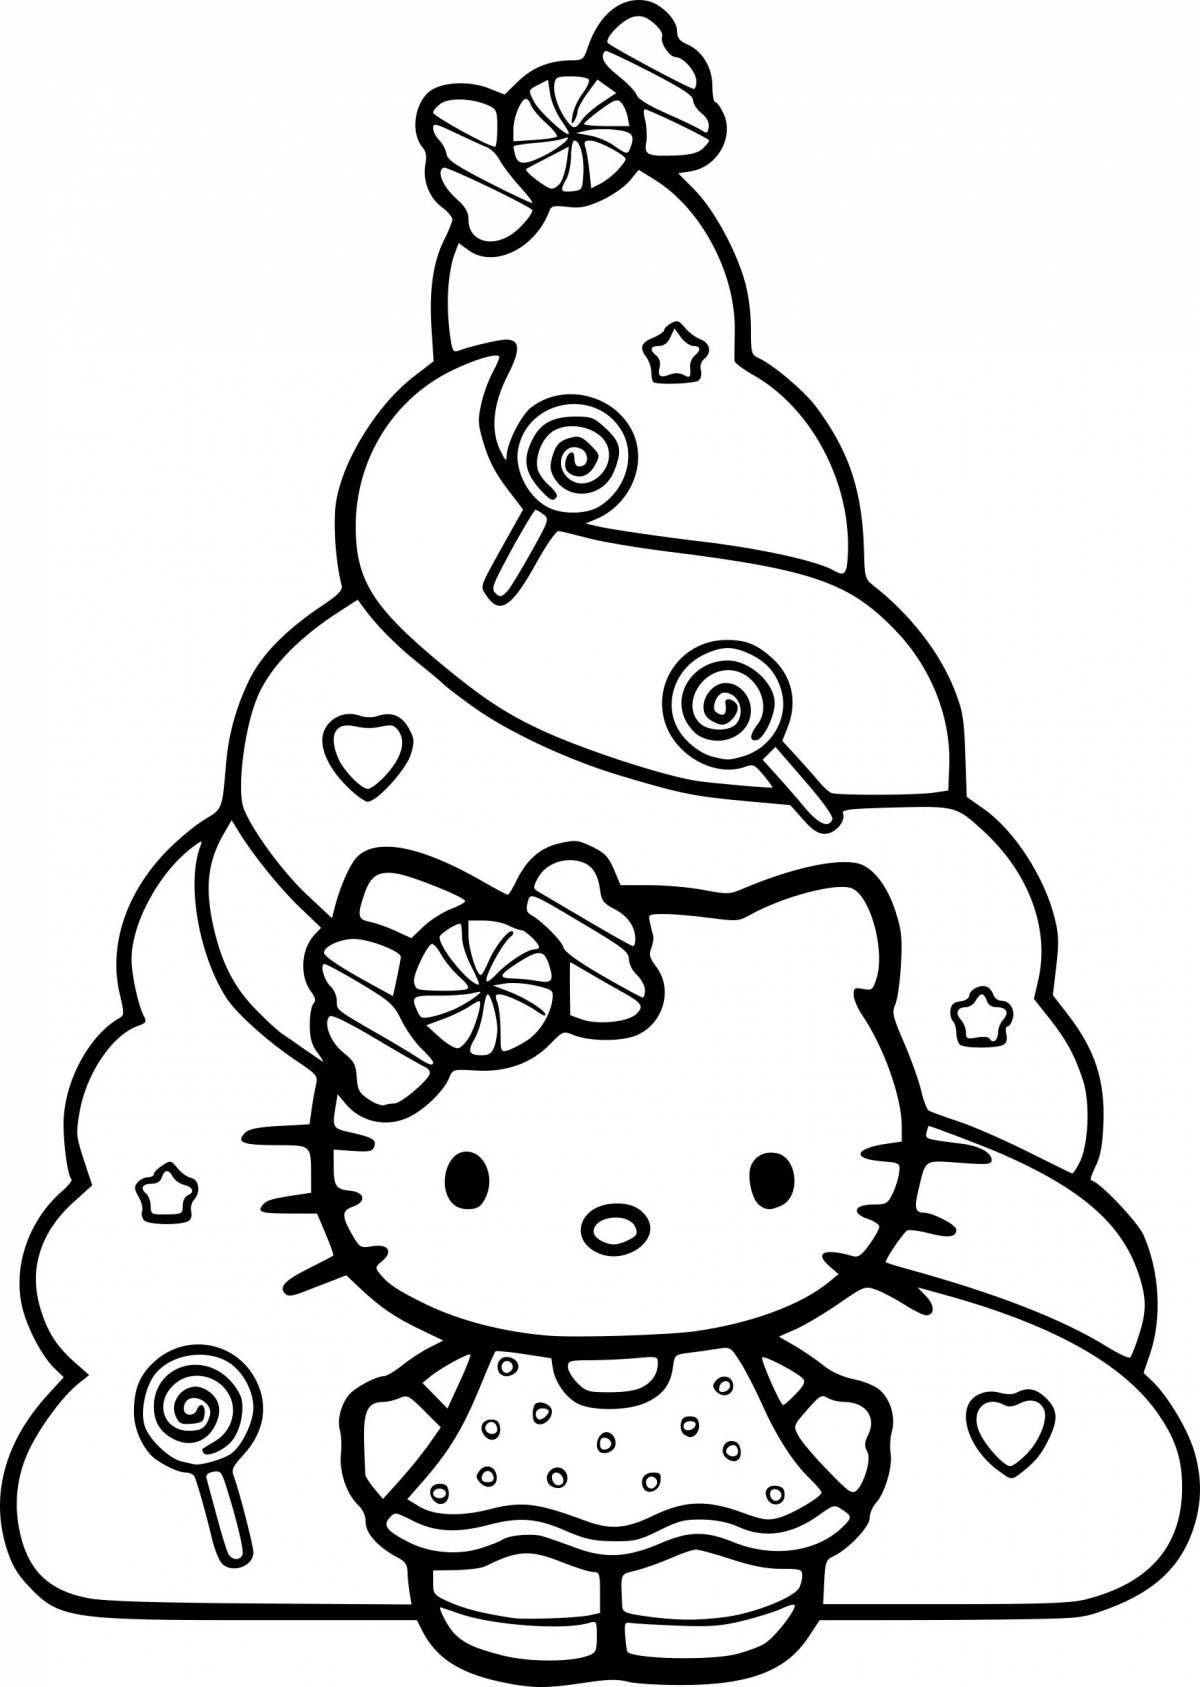 Amazing hello kitty penguin coloring book